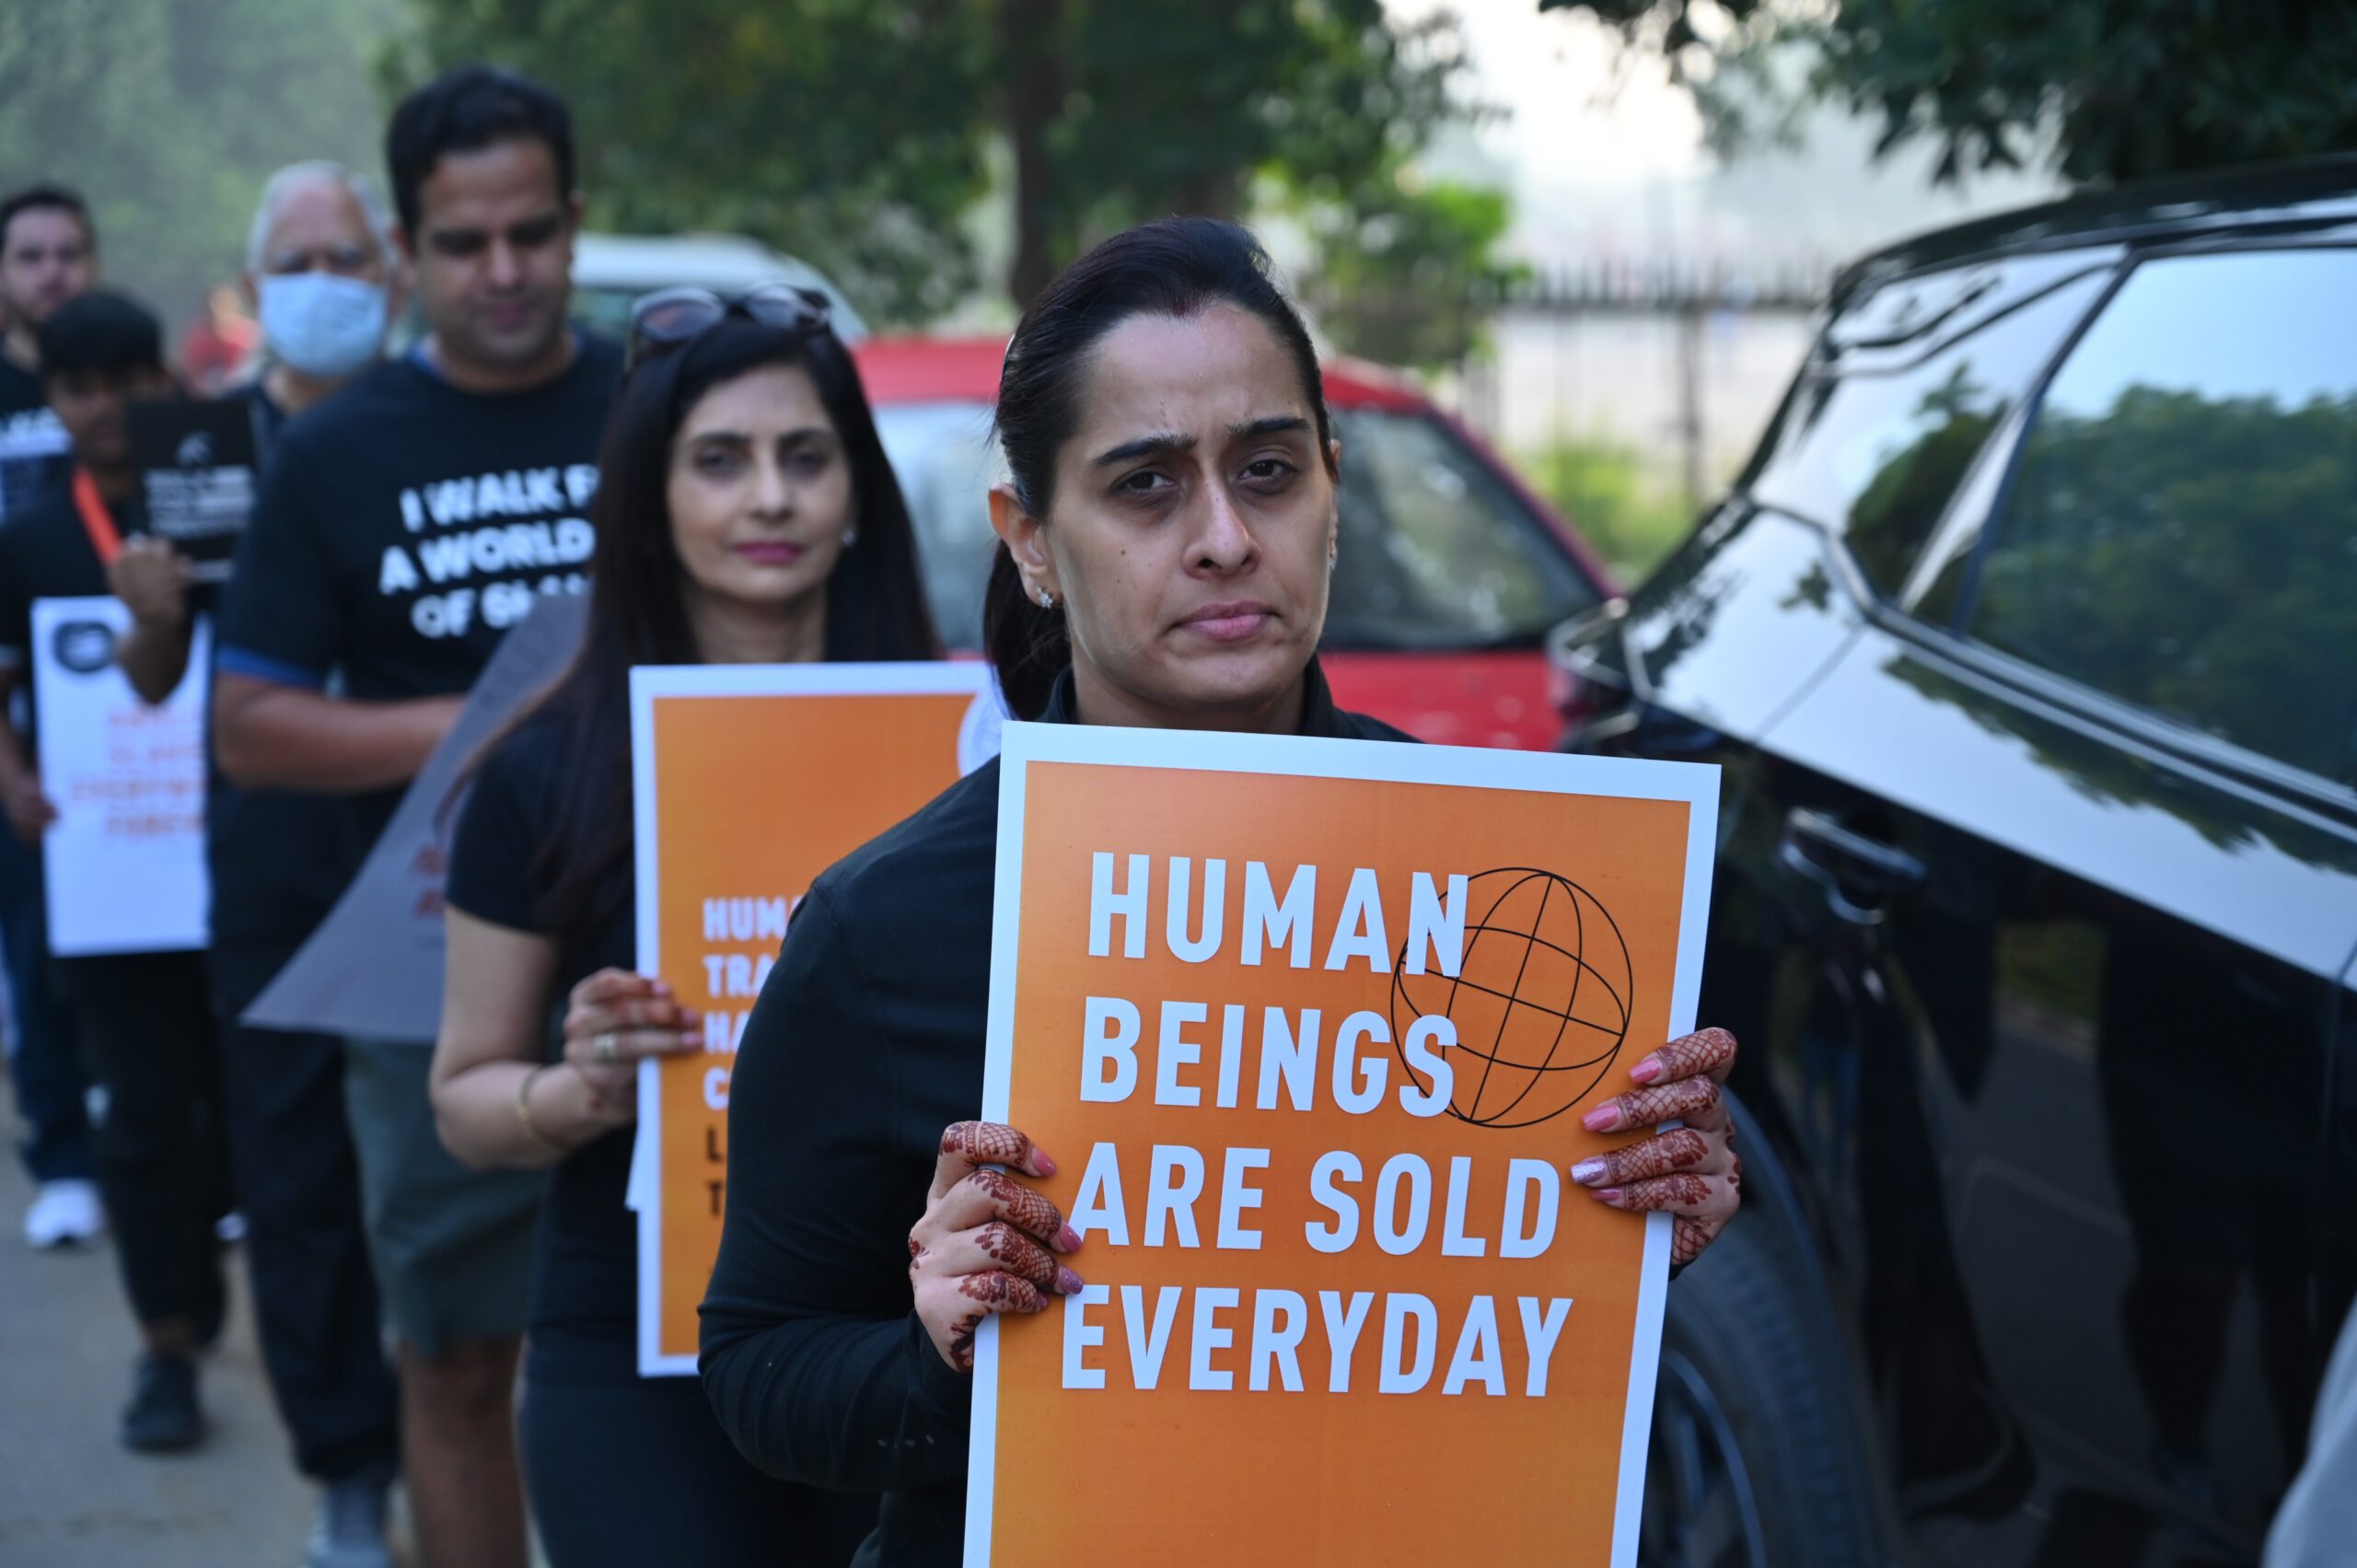 A woman carrying a sign at a Human Trafficking march that says, "Human Beings Are Sold Everyday".